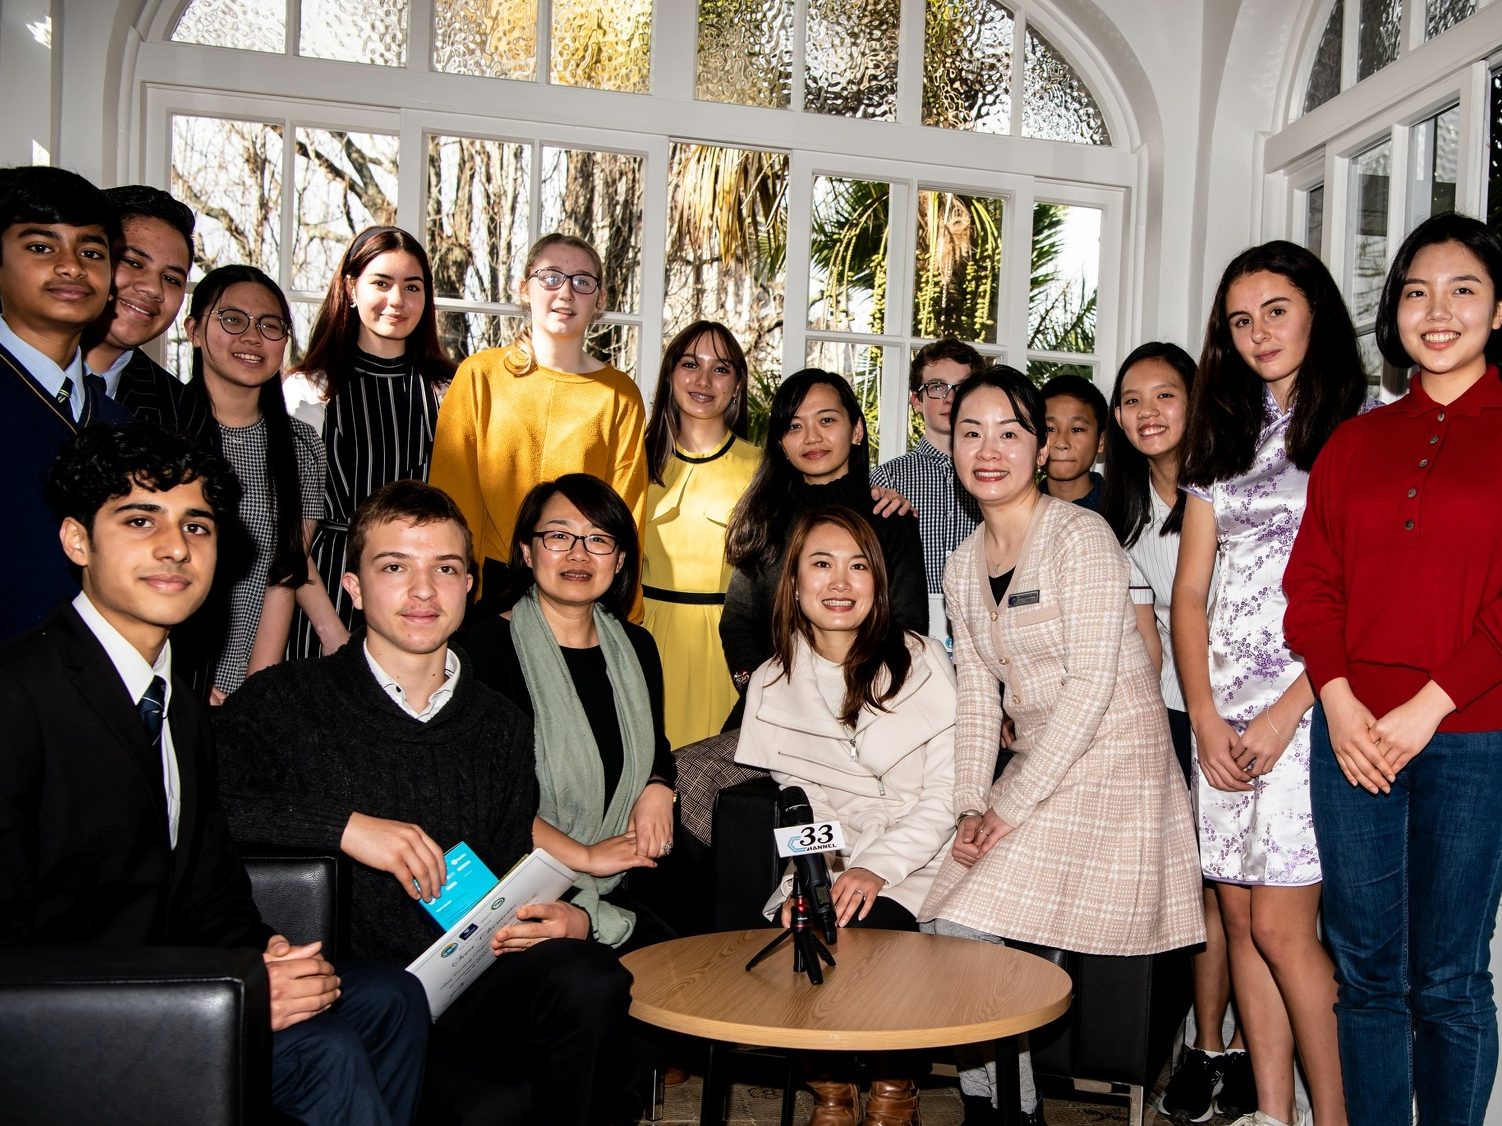 Auckland students achieved big success in Chinese Bridge’s NZ national final